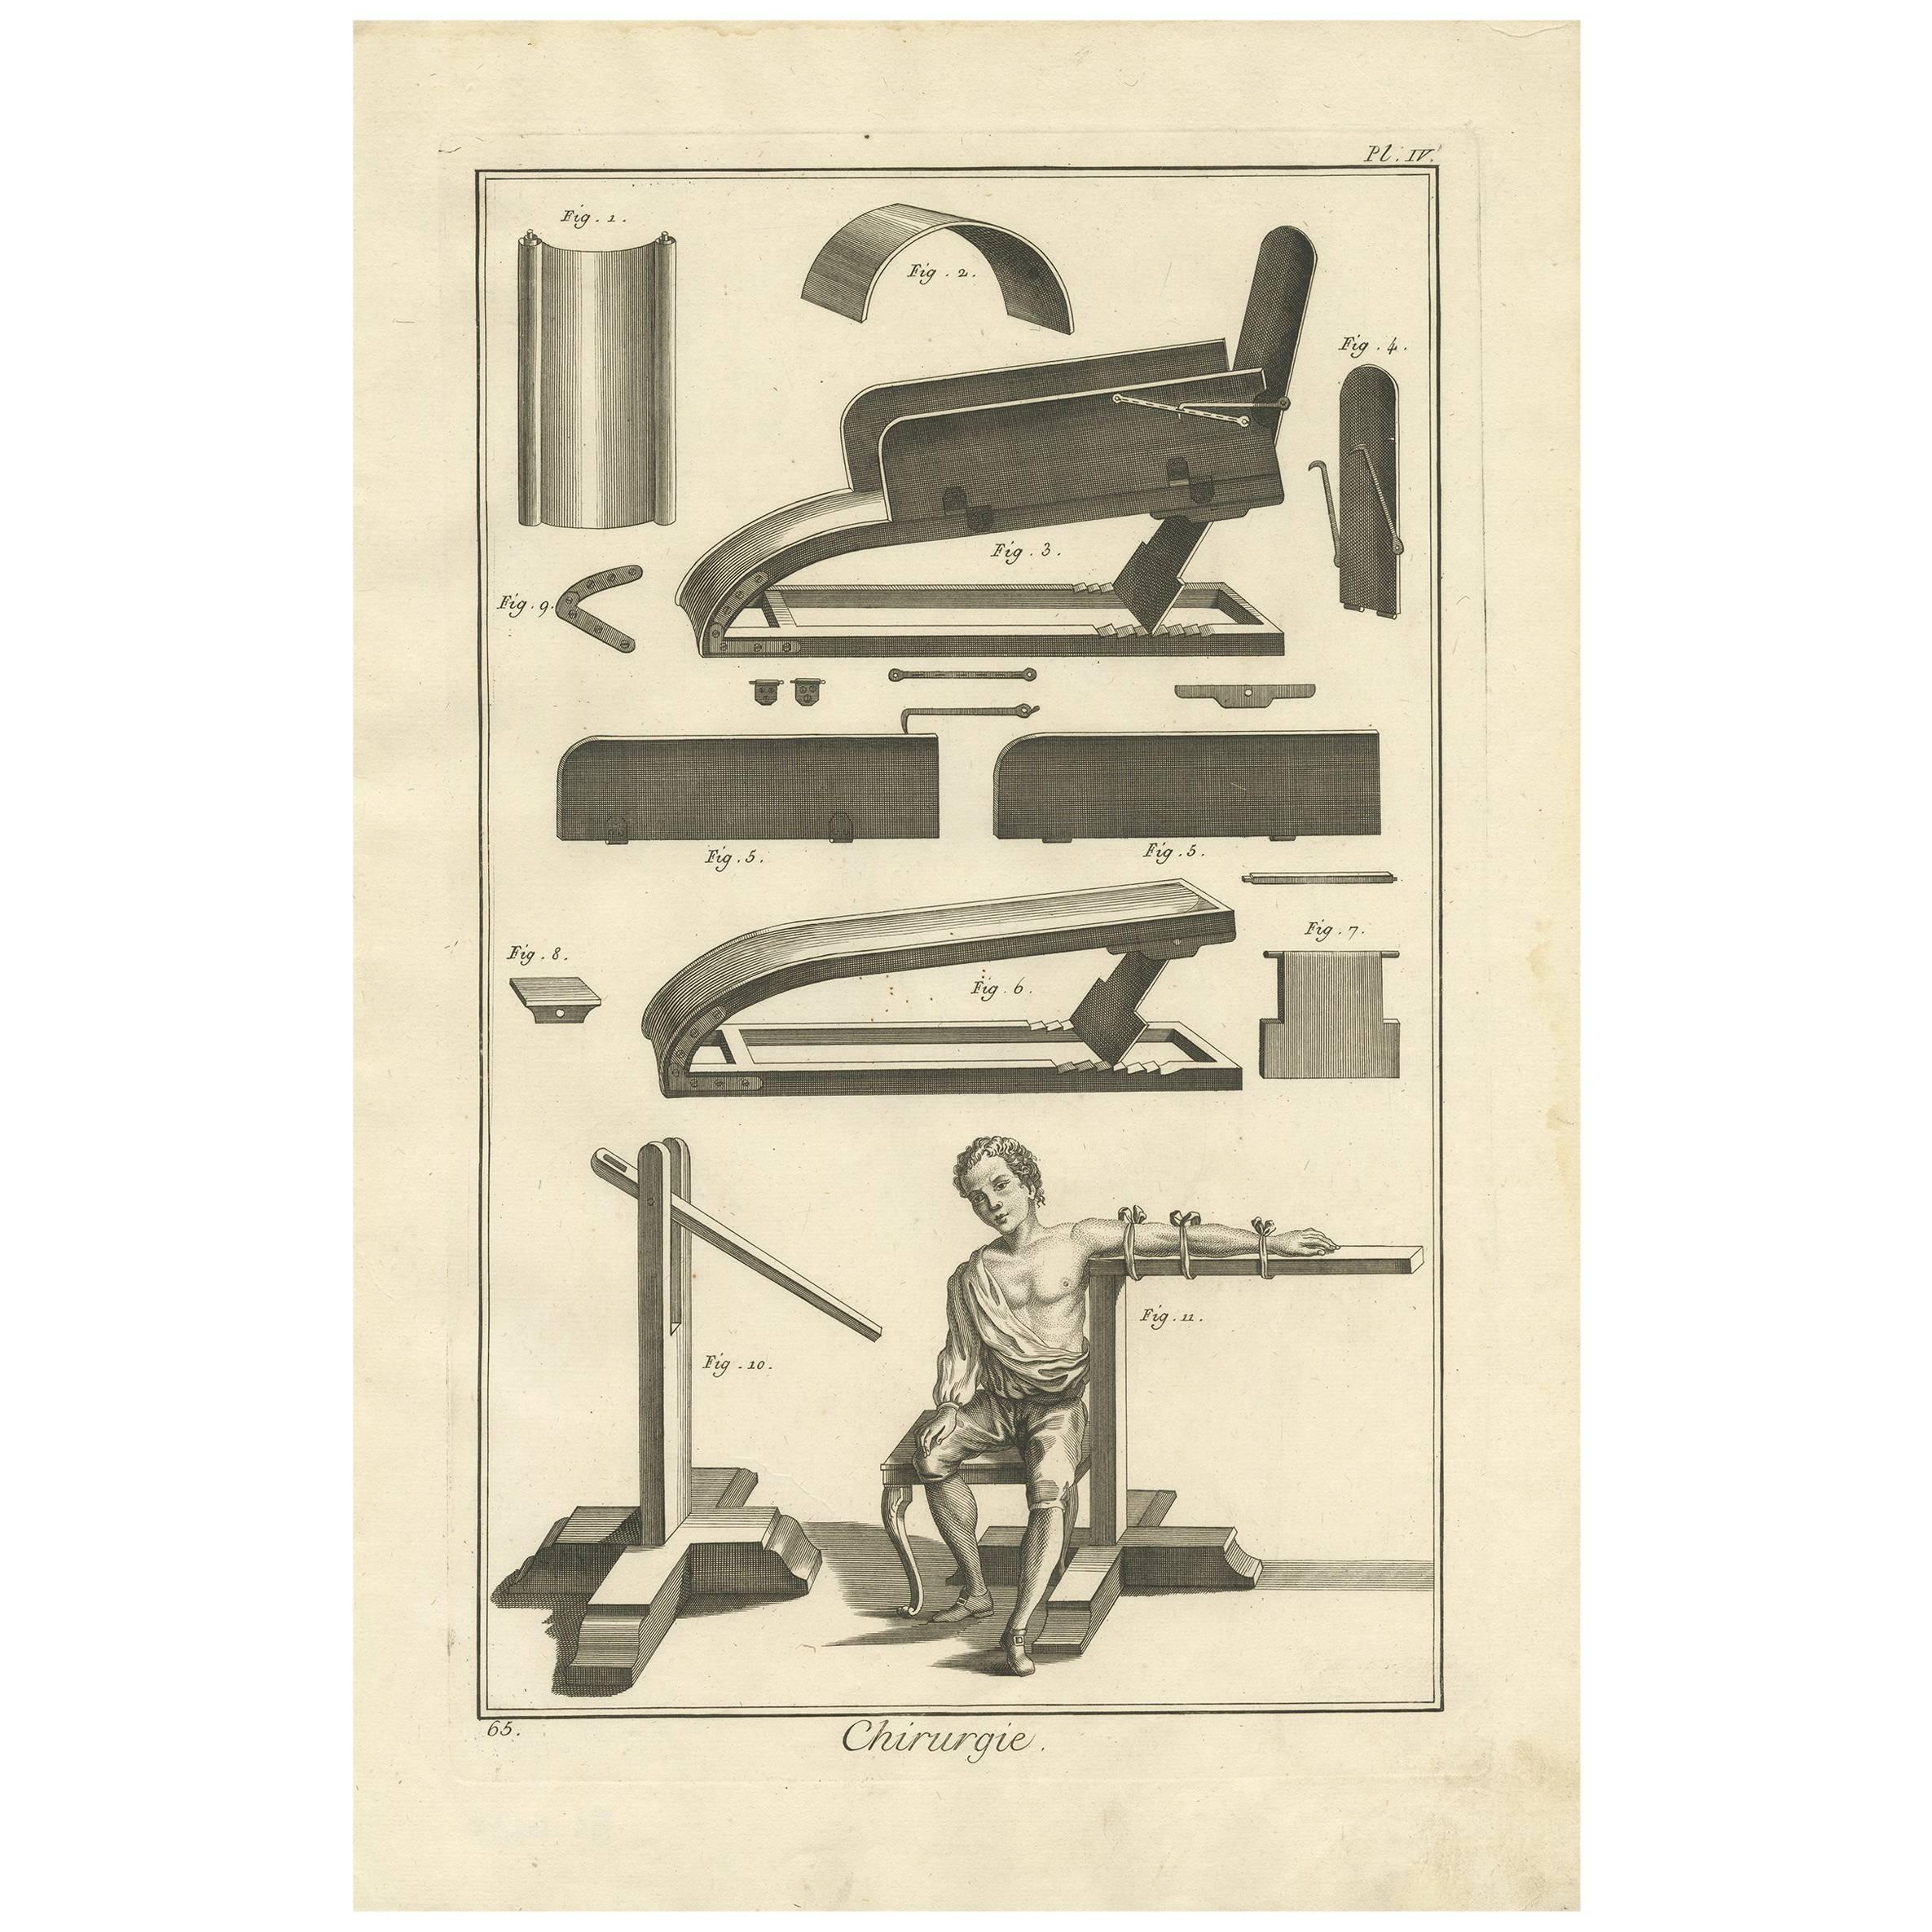 Antique Medical Print 'Pl. IV' by D. Diderot, circa 1760